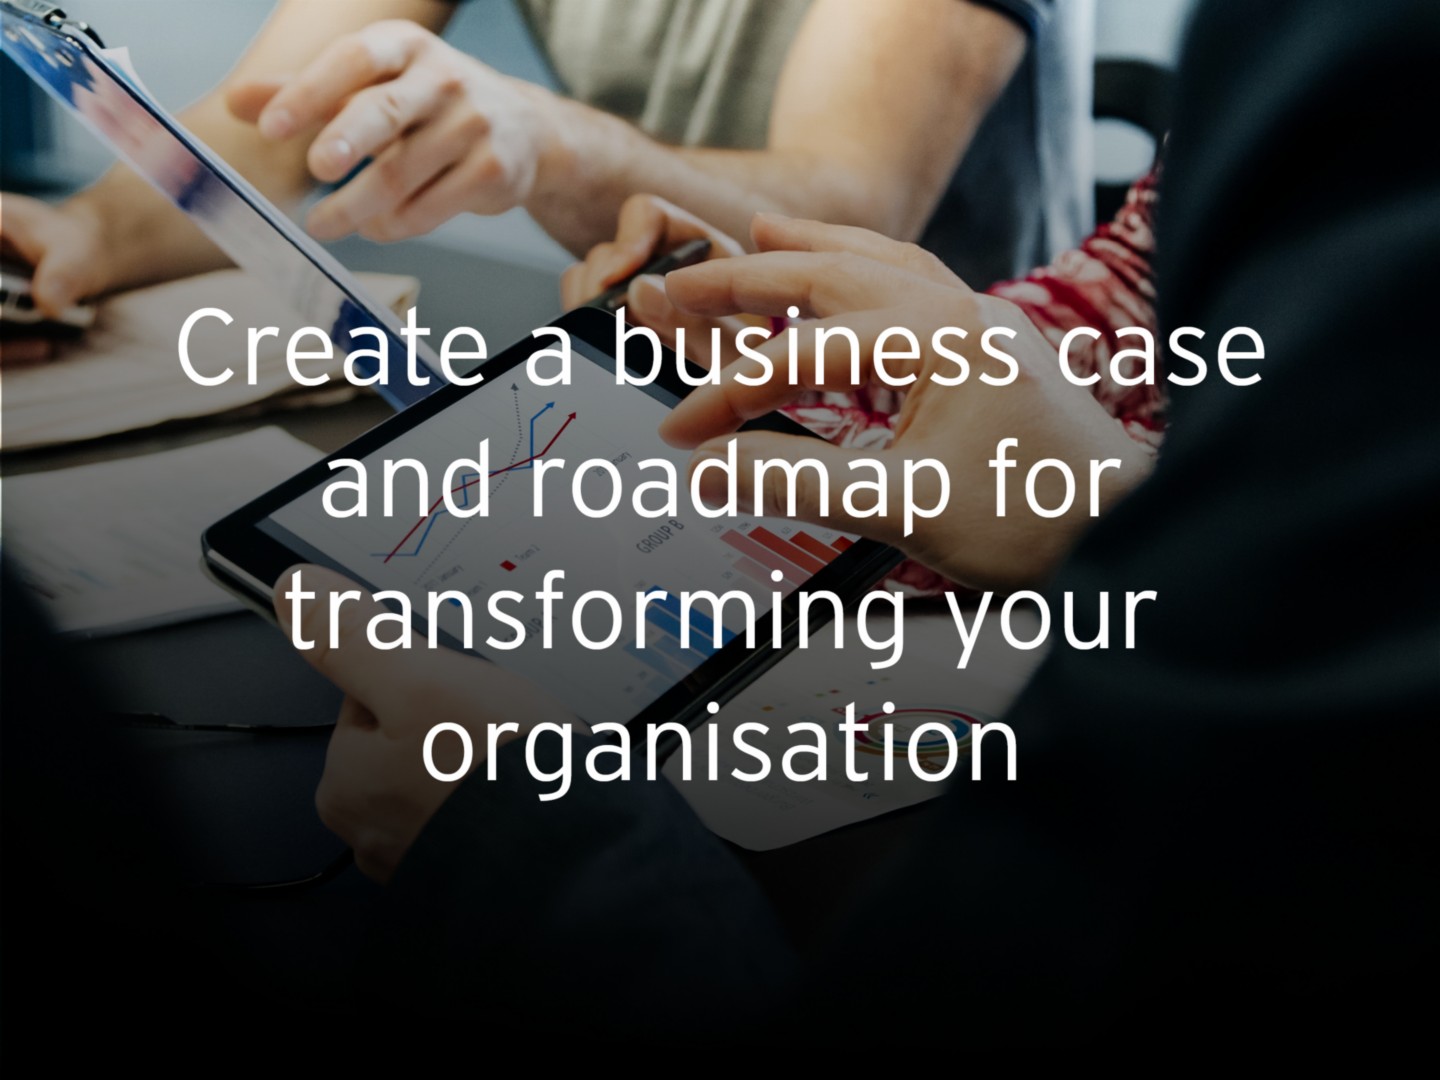 Create a business case and roadmap for transforming your organisation